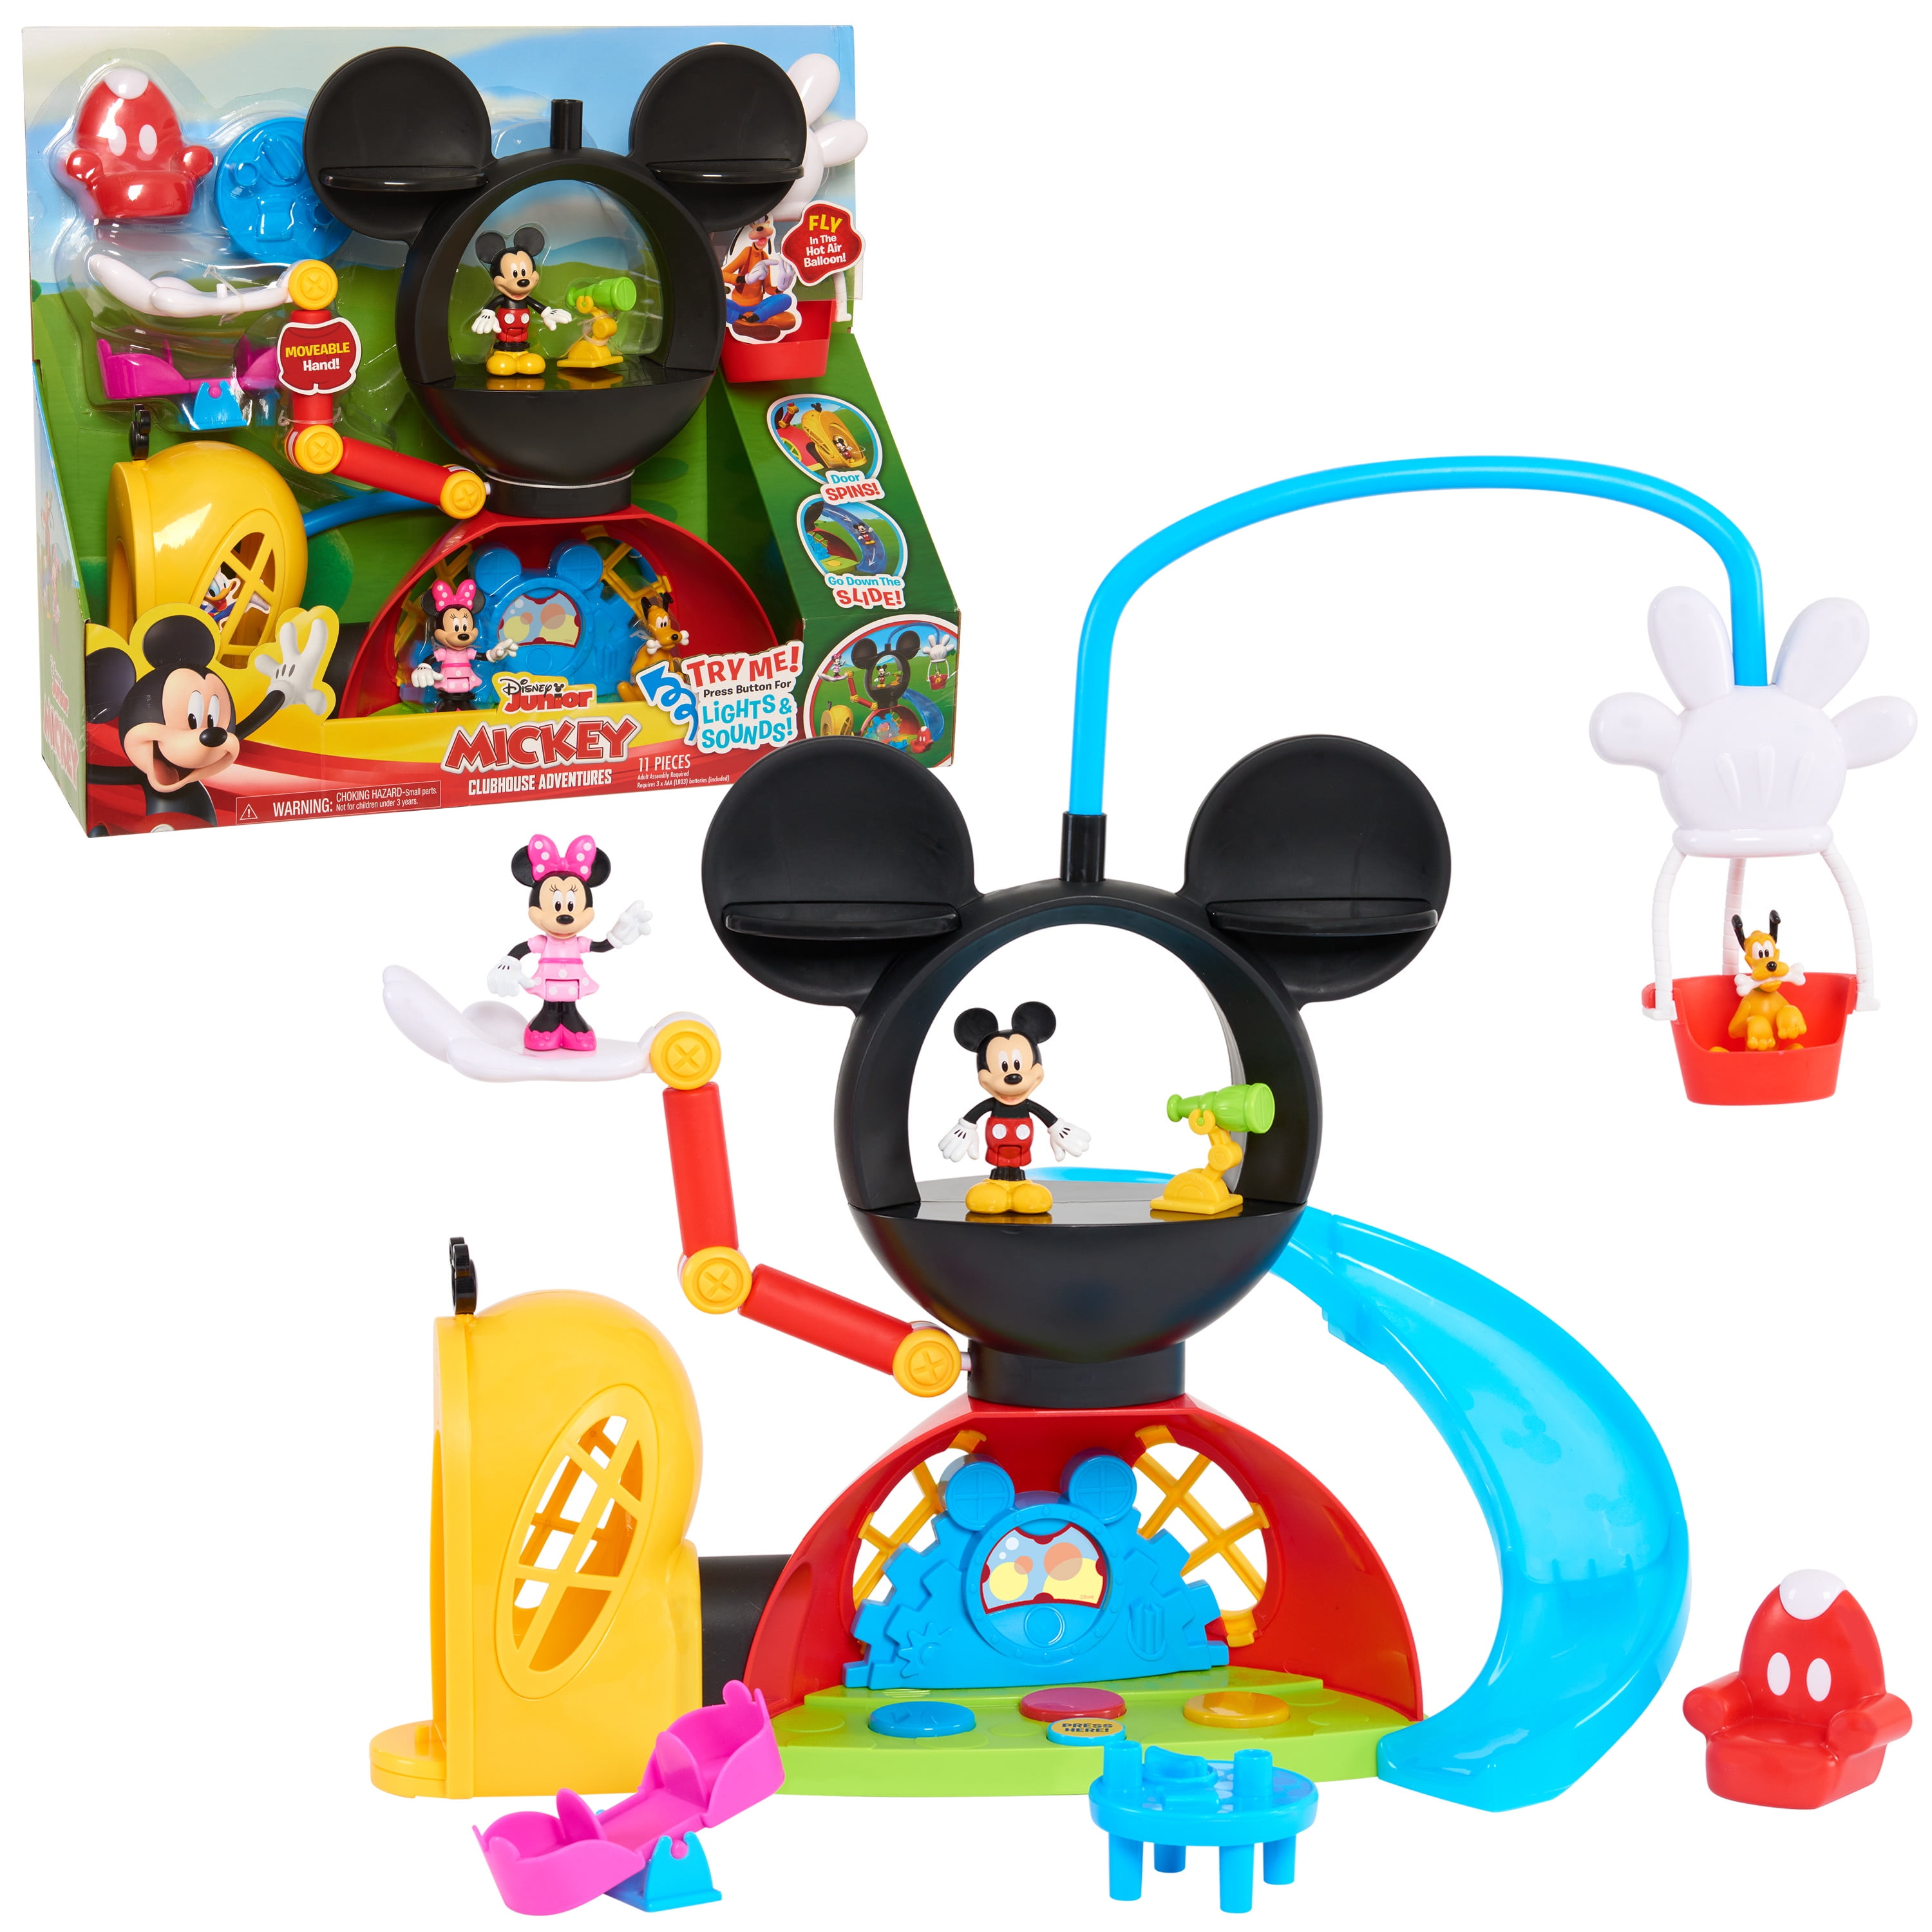 Disney Exclusive Mickey Mouse Clubhouse Playset